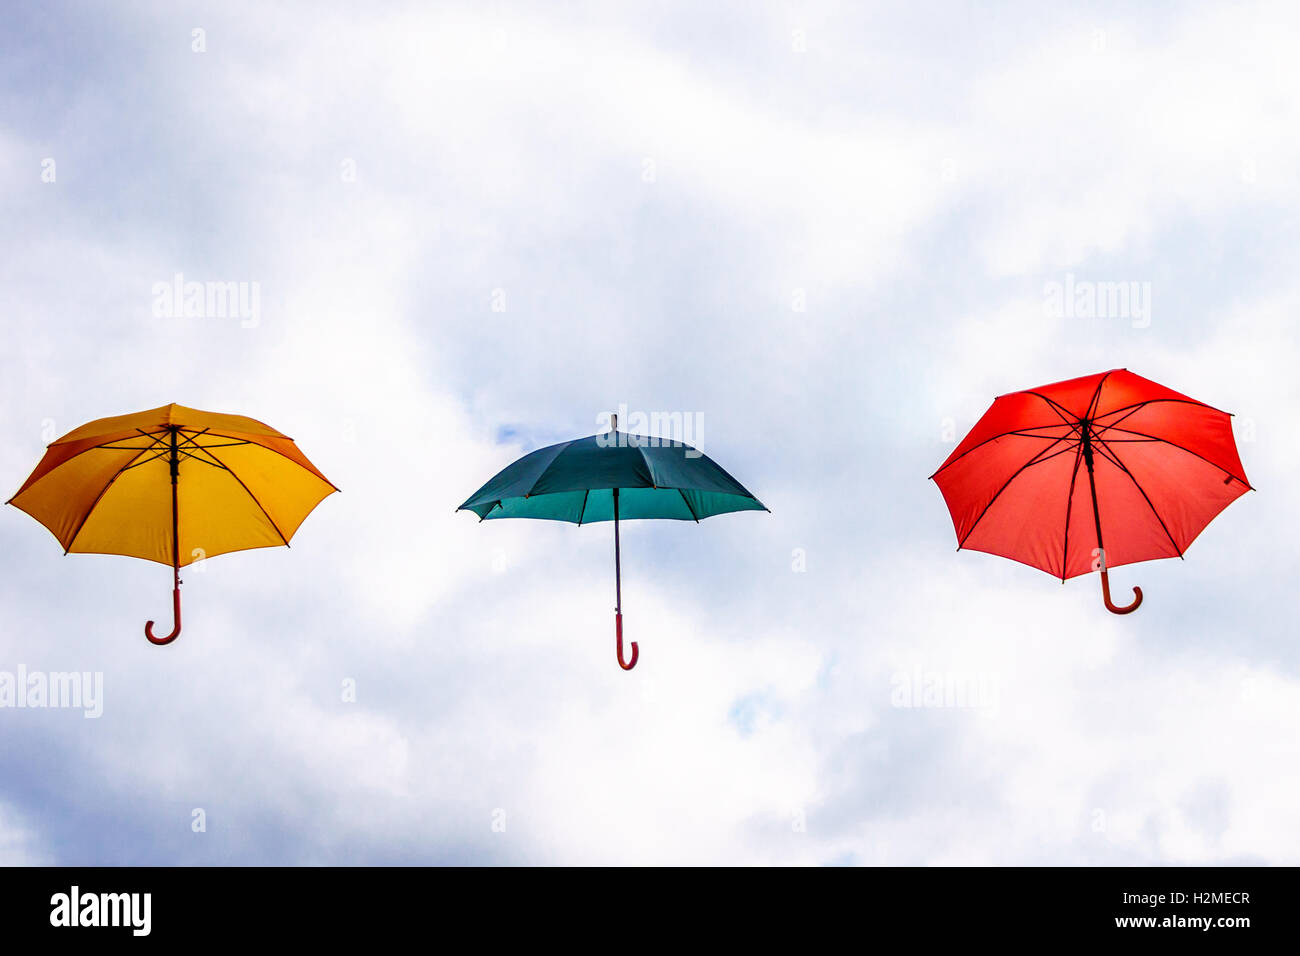 Yellow Umbrella, Green Umbrella, Red Umbrella floating in the Air under Partly Blue Sky with cloudy periods. Stock Photo